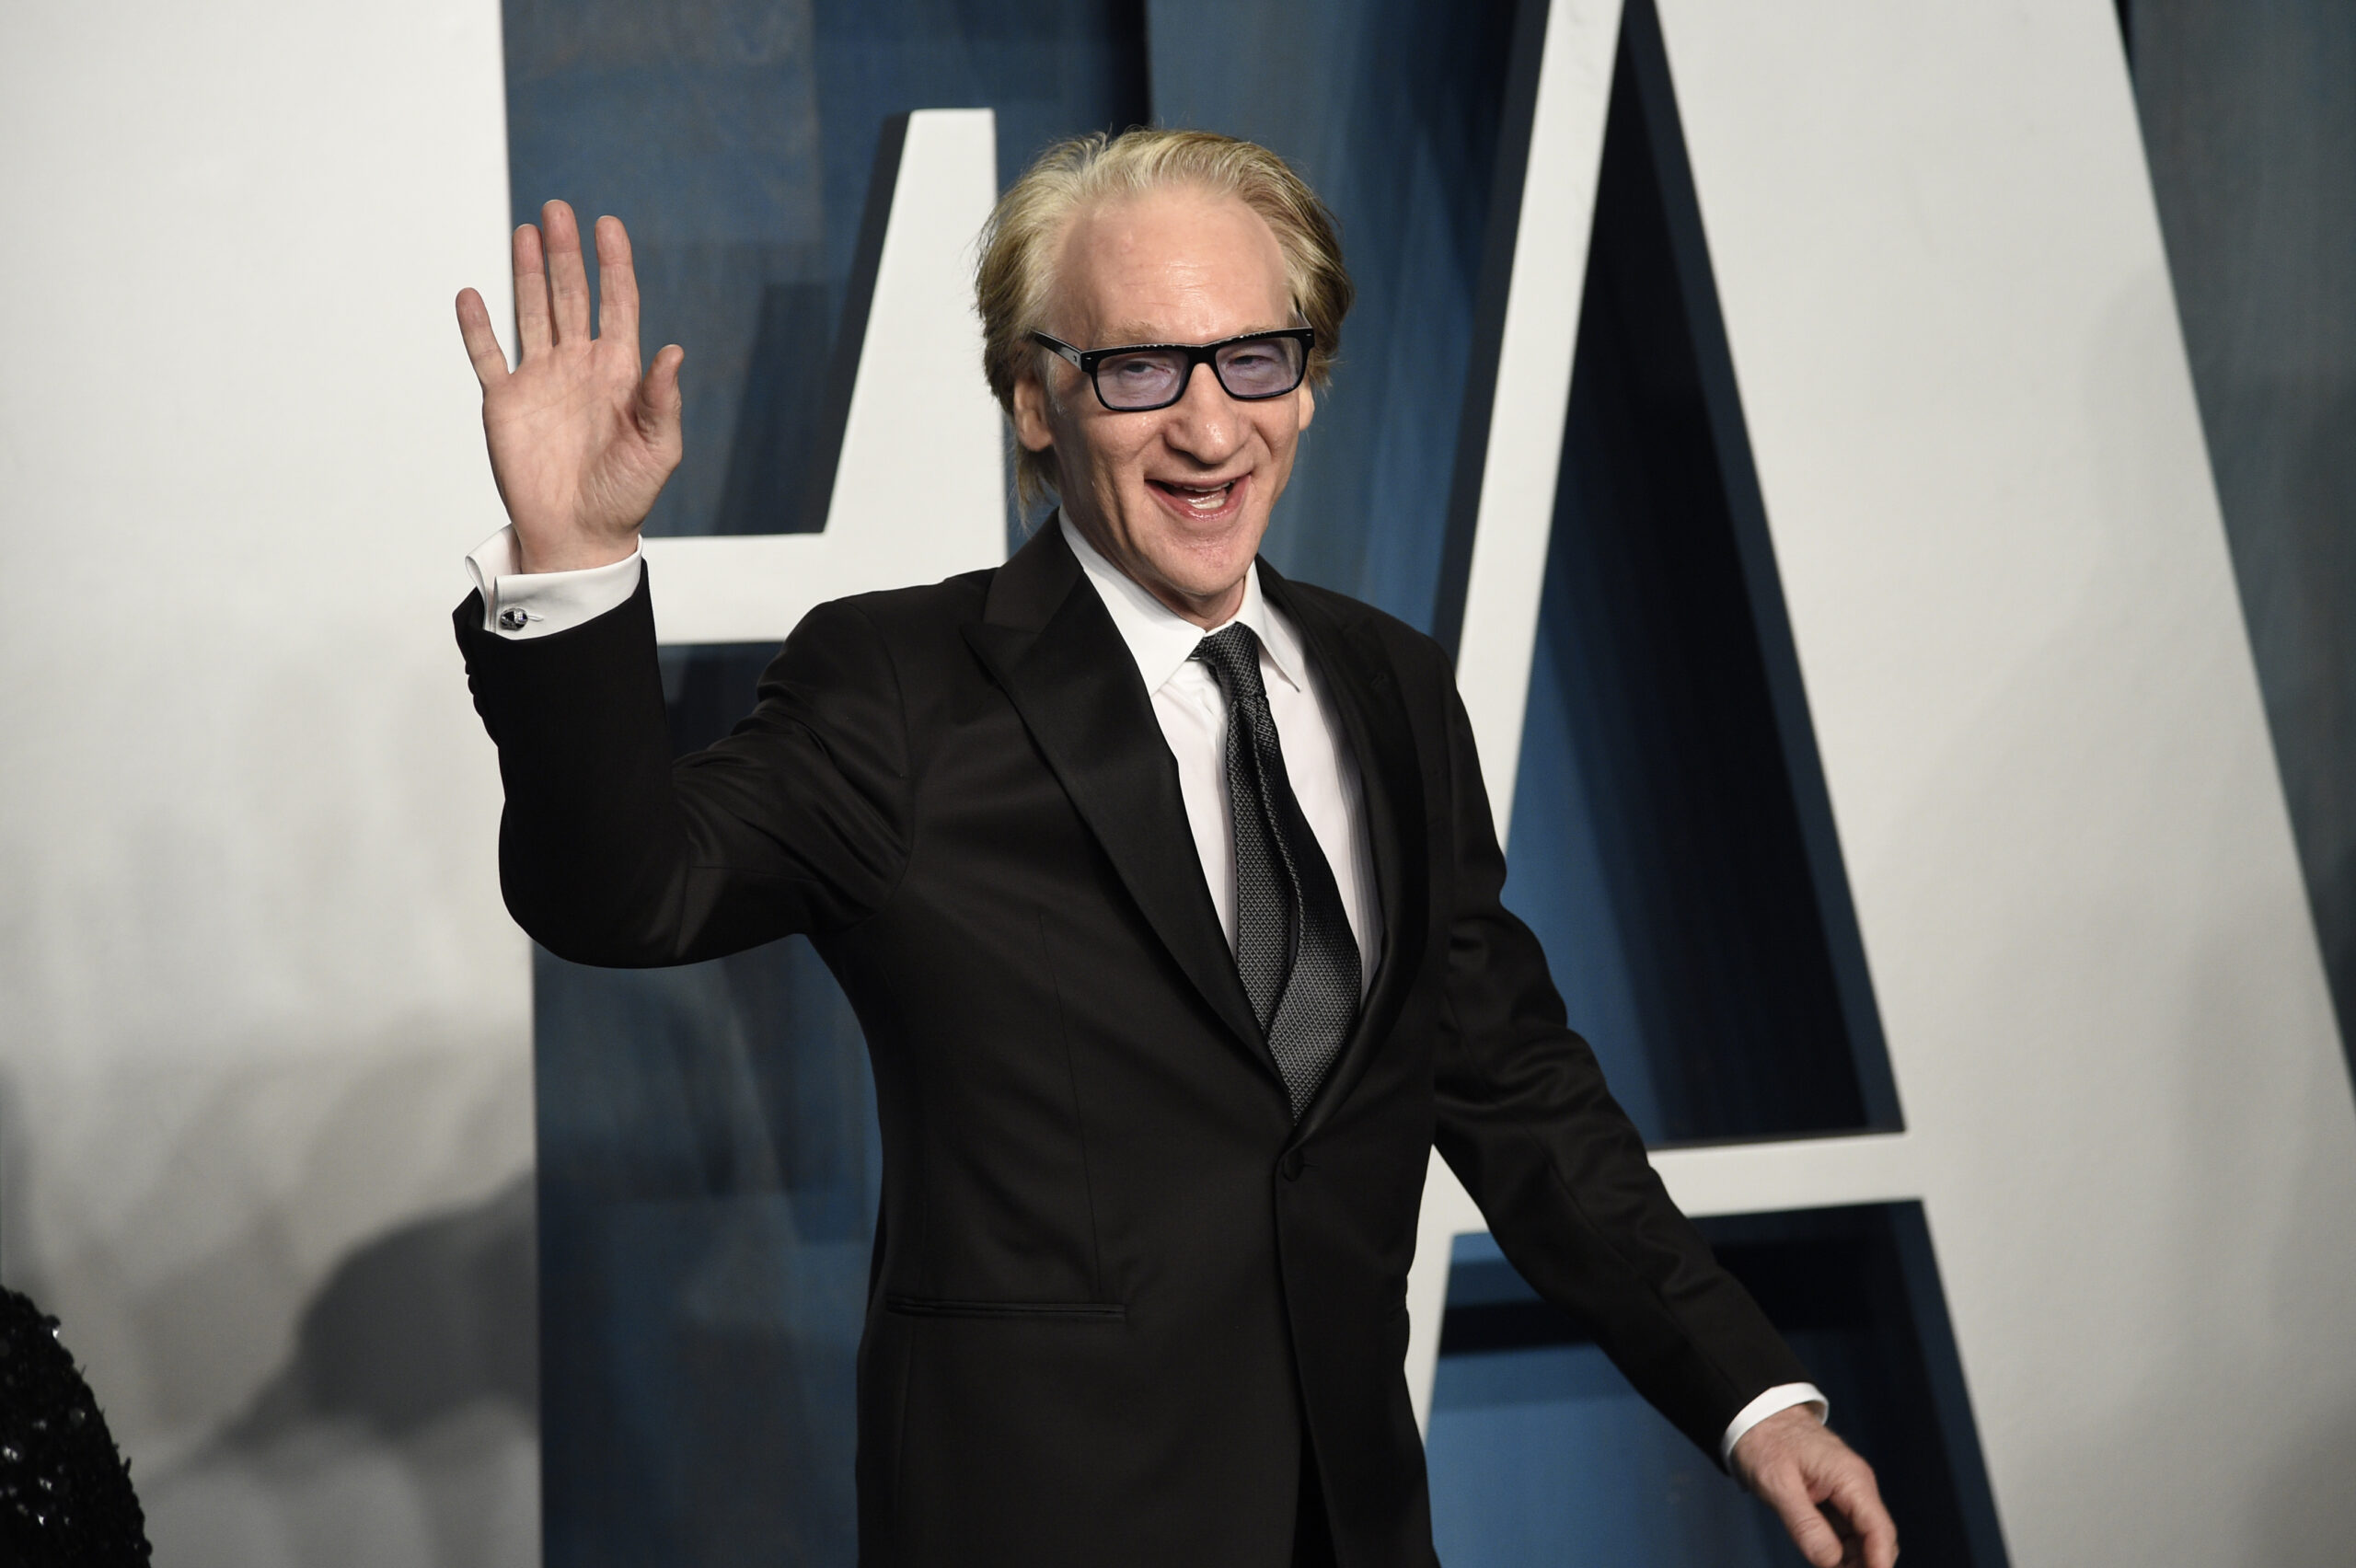 Bill Maher in a suit waving as he arrives at 2022 Oscars after party